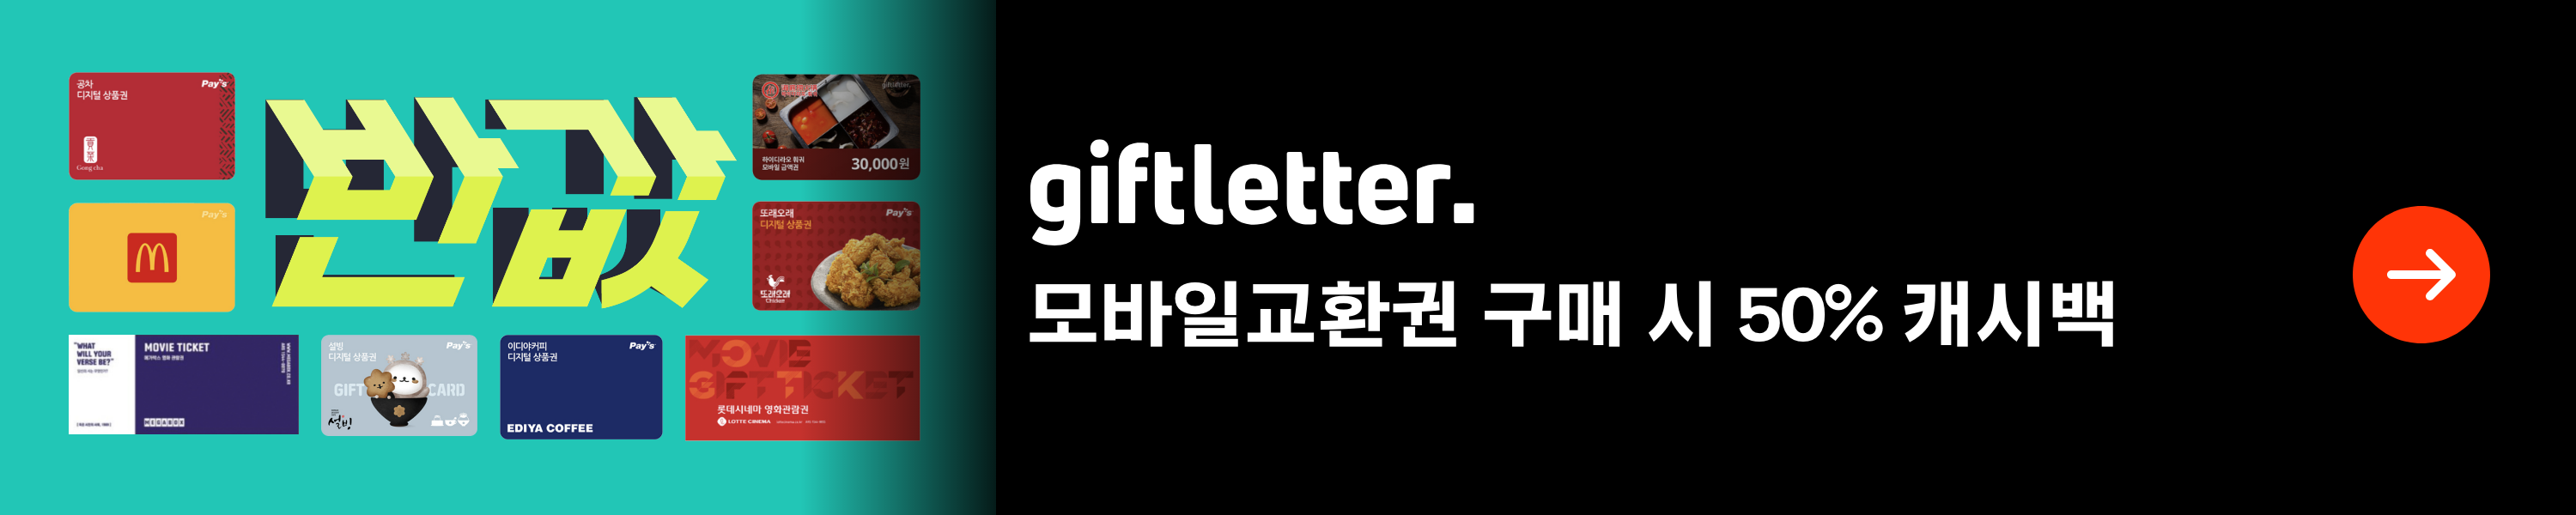 ntg_campaign_giftletter